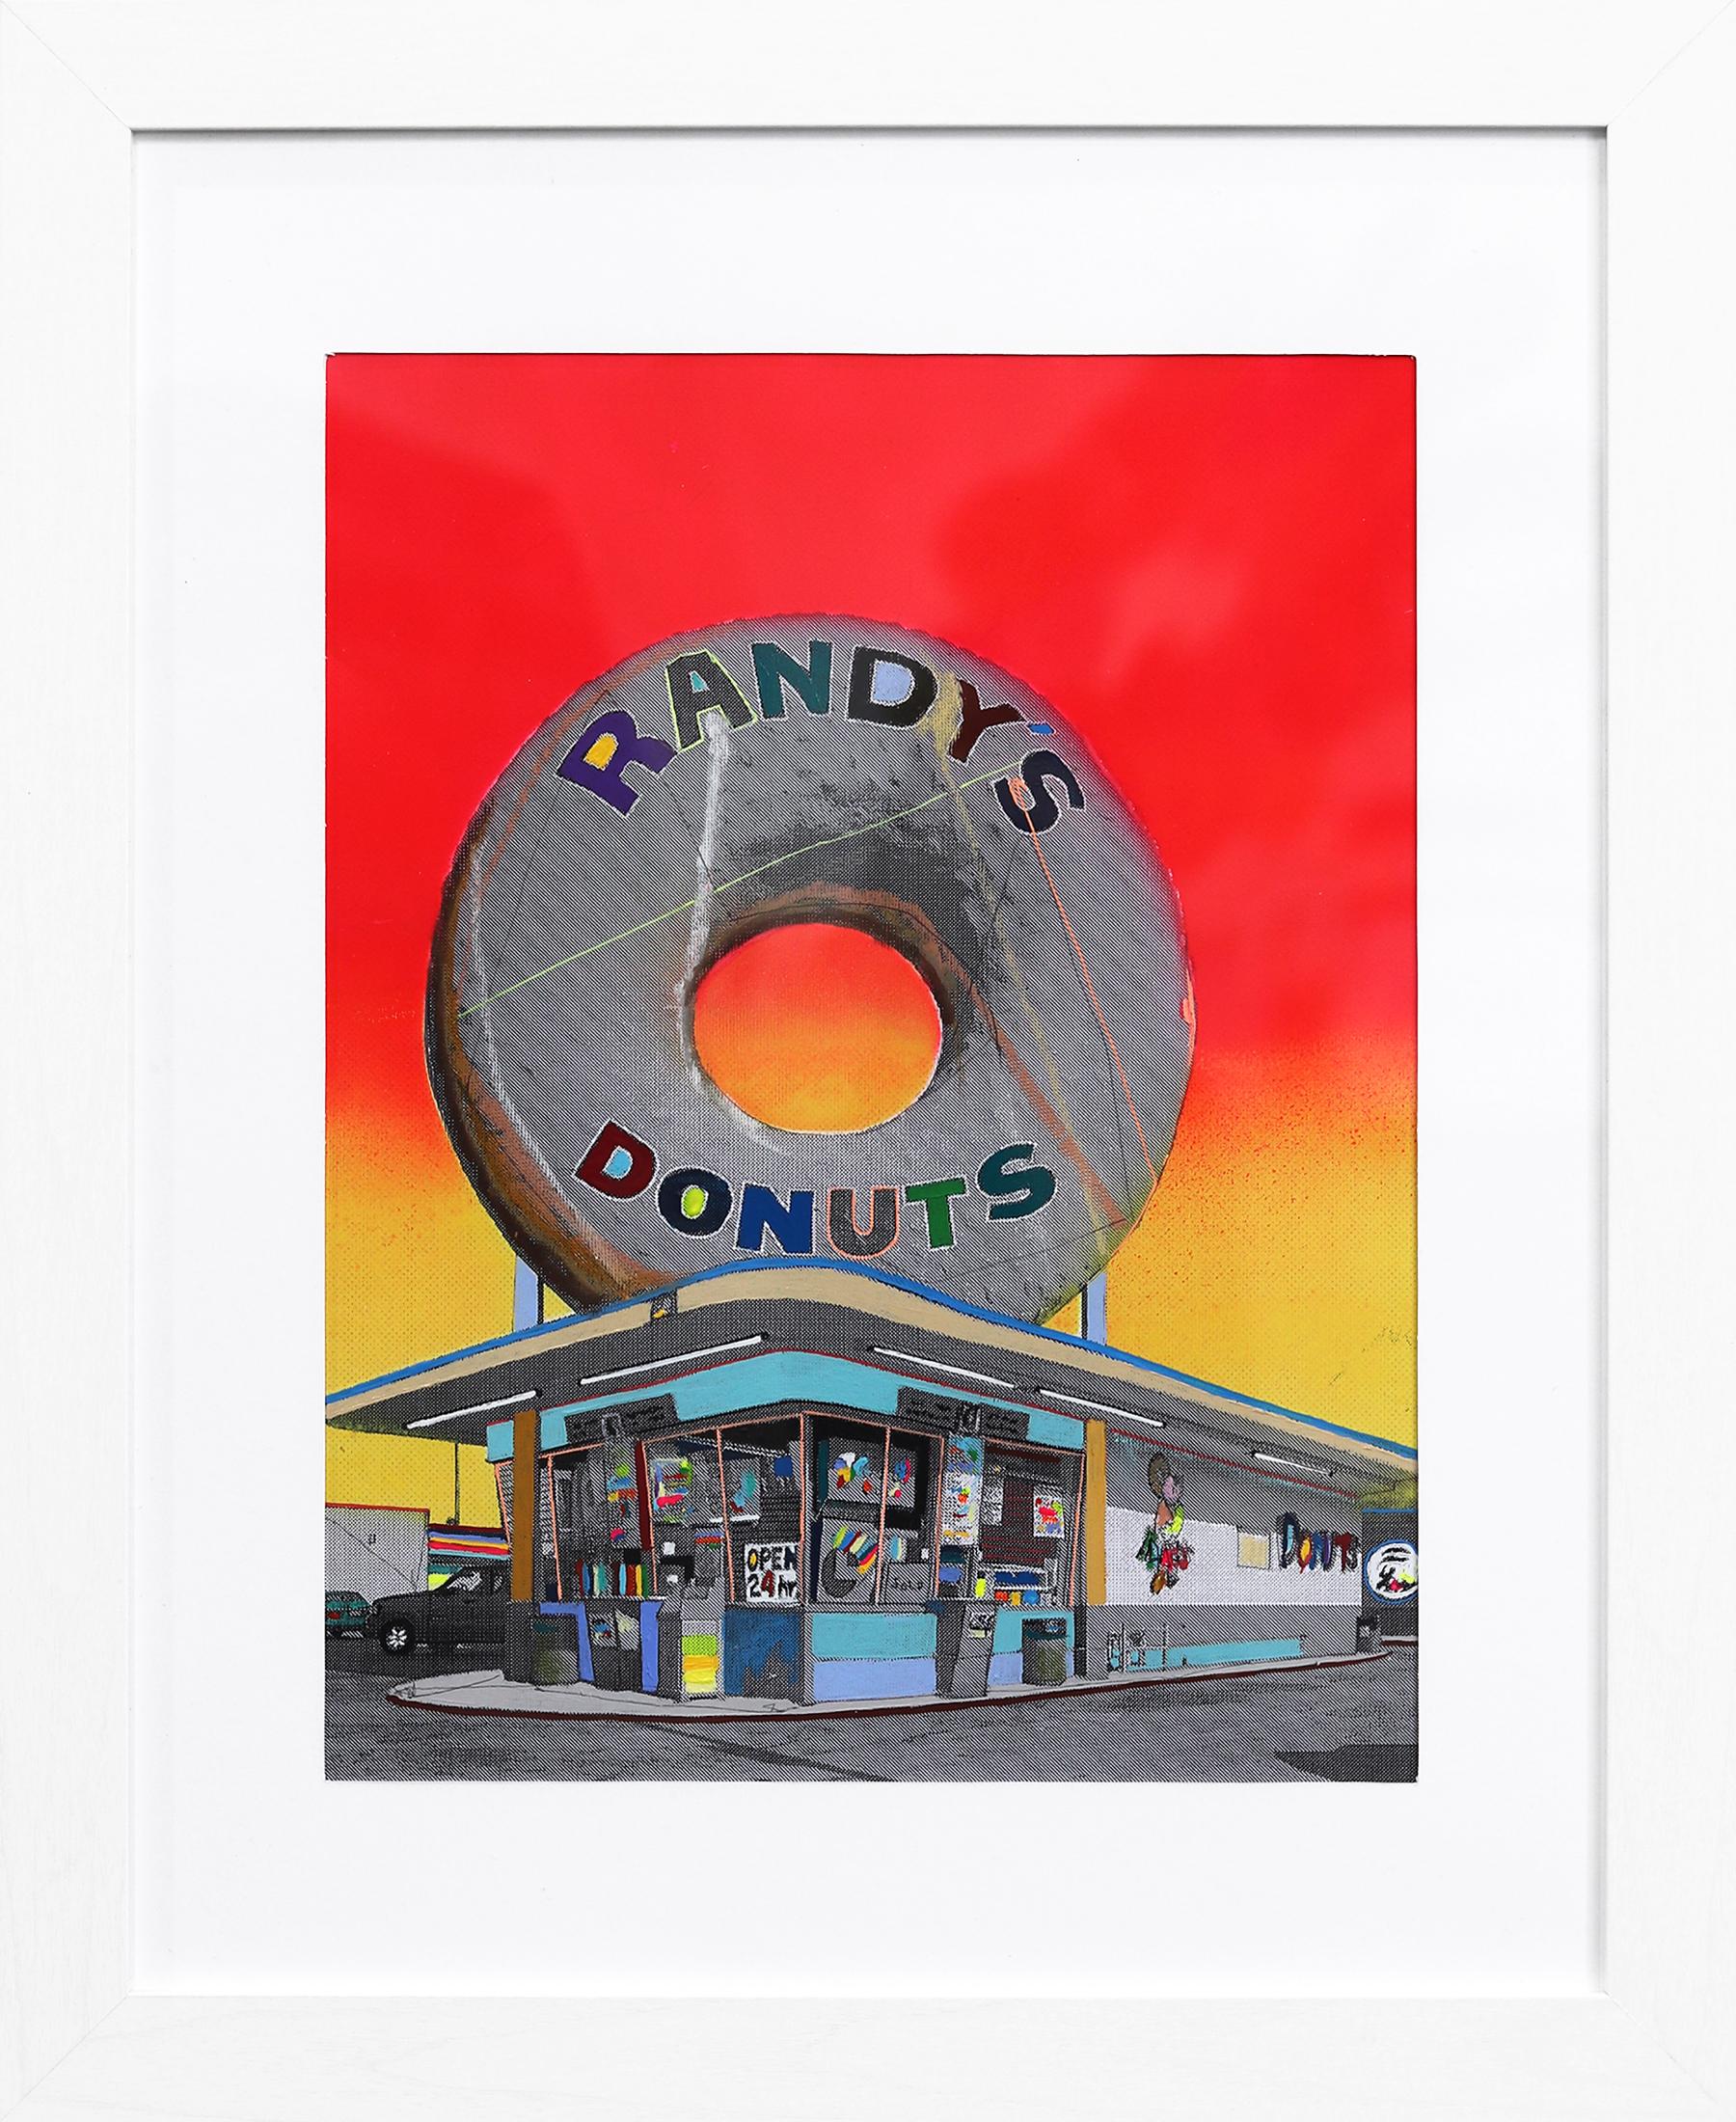 Giant Donut in Inglewood #33 - Colorful Authentic Environment Original Painting